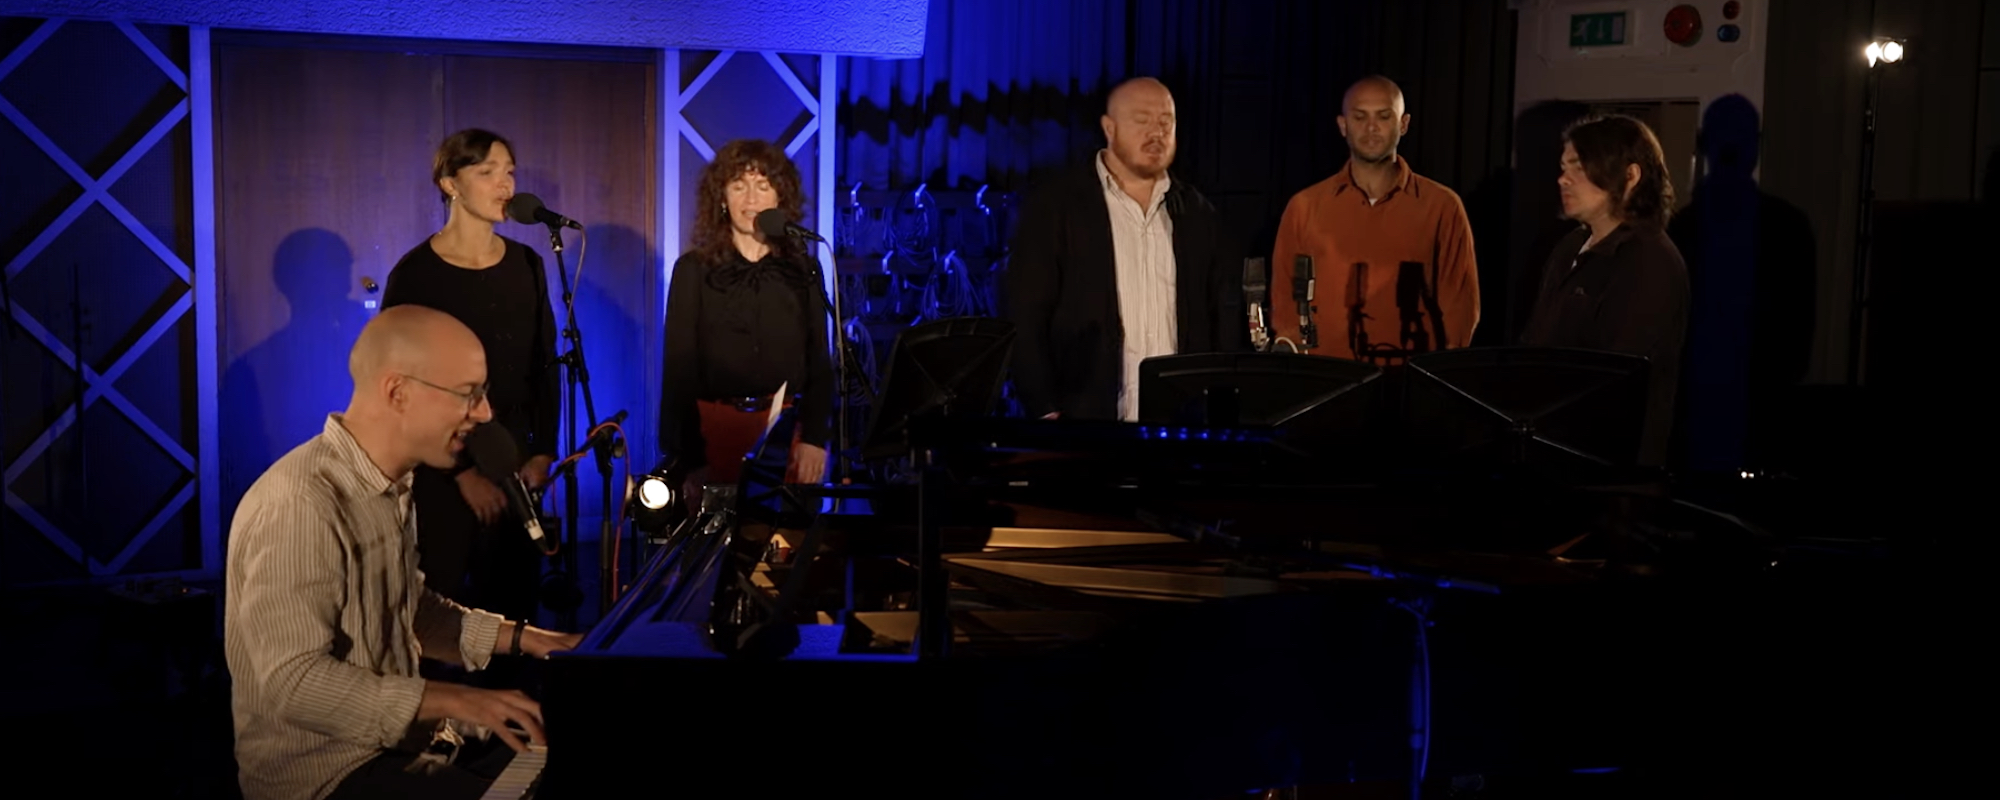 Bombay Bicycle Club Reimagined Taylor Swift’s “Cruel Summer” Into a Piano-Pop Jam